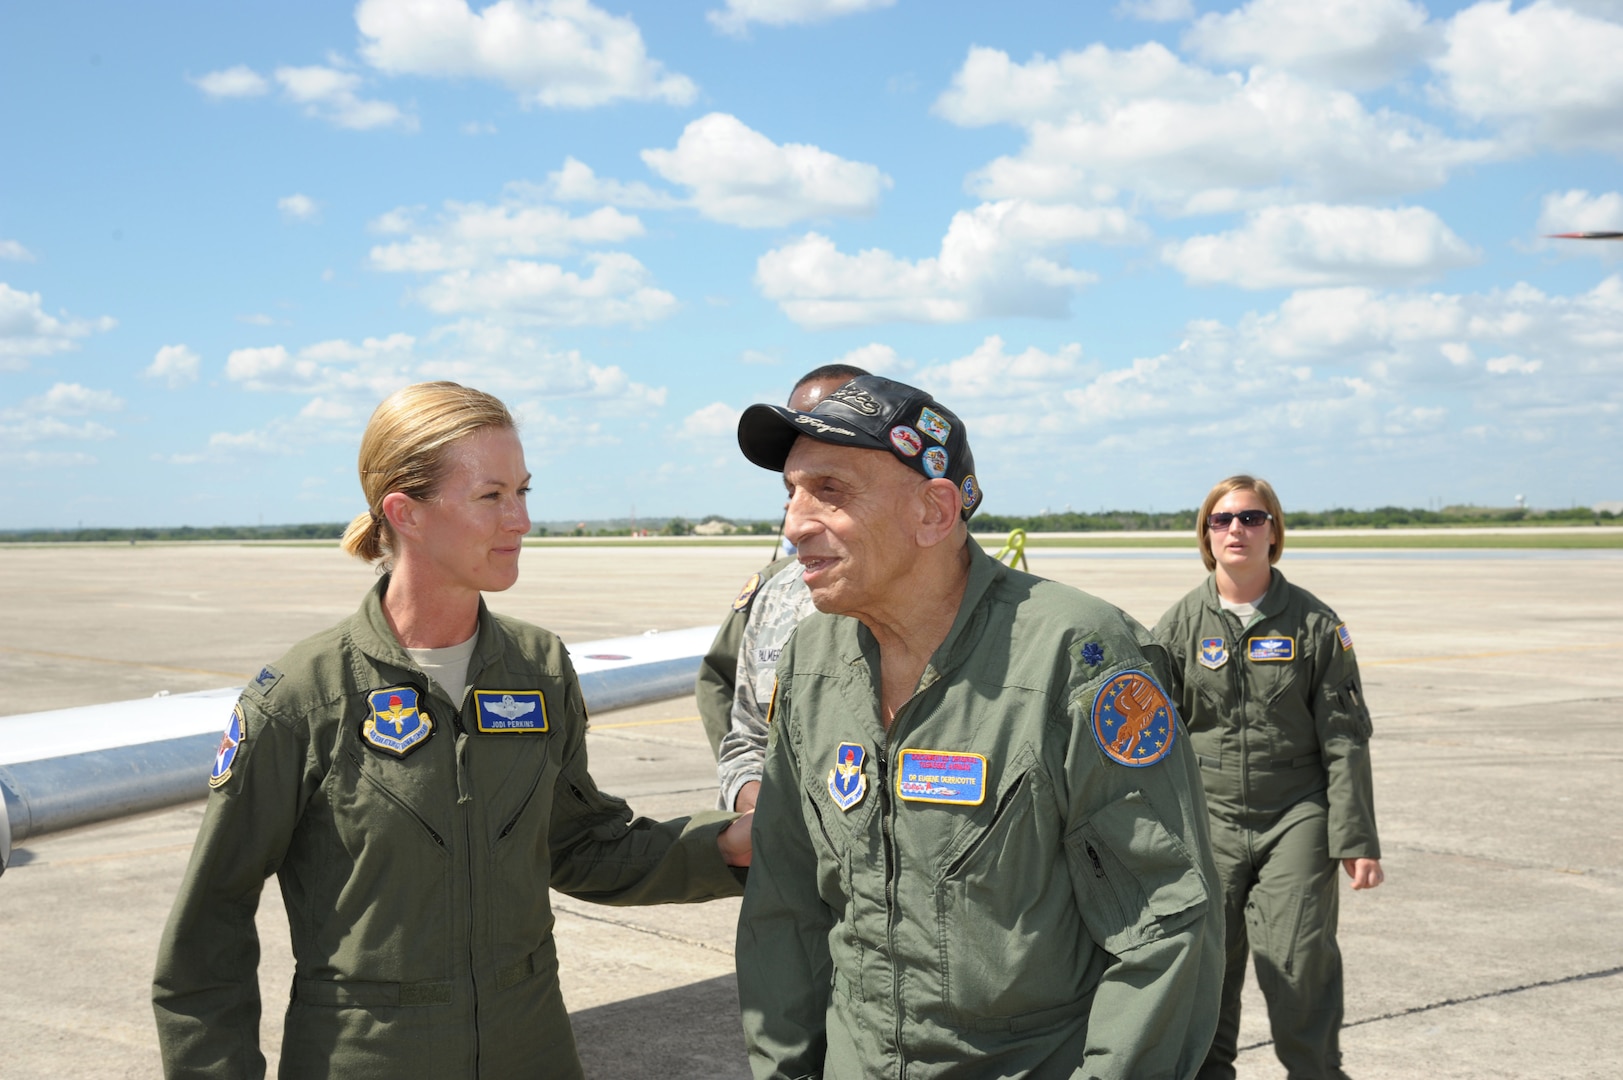 Col. Jodi Perkins, 12th Flying Training Wing vice commander greets Dr. Eugene Derricote, an original Tuskegee Airman, , during the Tuskegee Airmen Tribute 2015, June 11, at Joint Base San Antonio-Randolph. The Tuskegee Airmen were the first African-American military aviators in the United States Armed Forces beginning in World War II.  (U.S. Air Force photo by Joel Martinez)